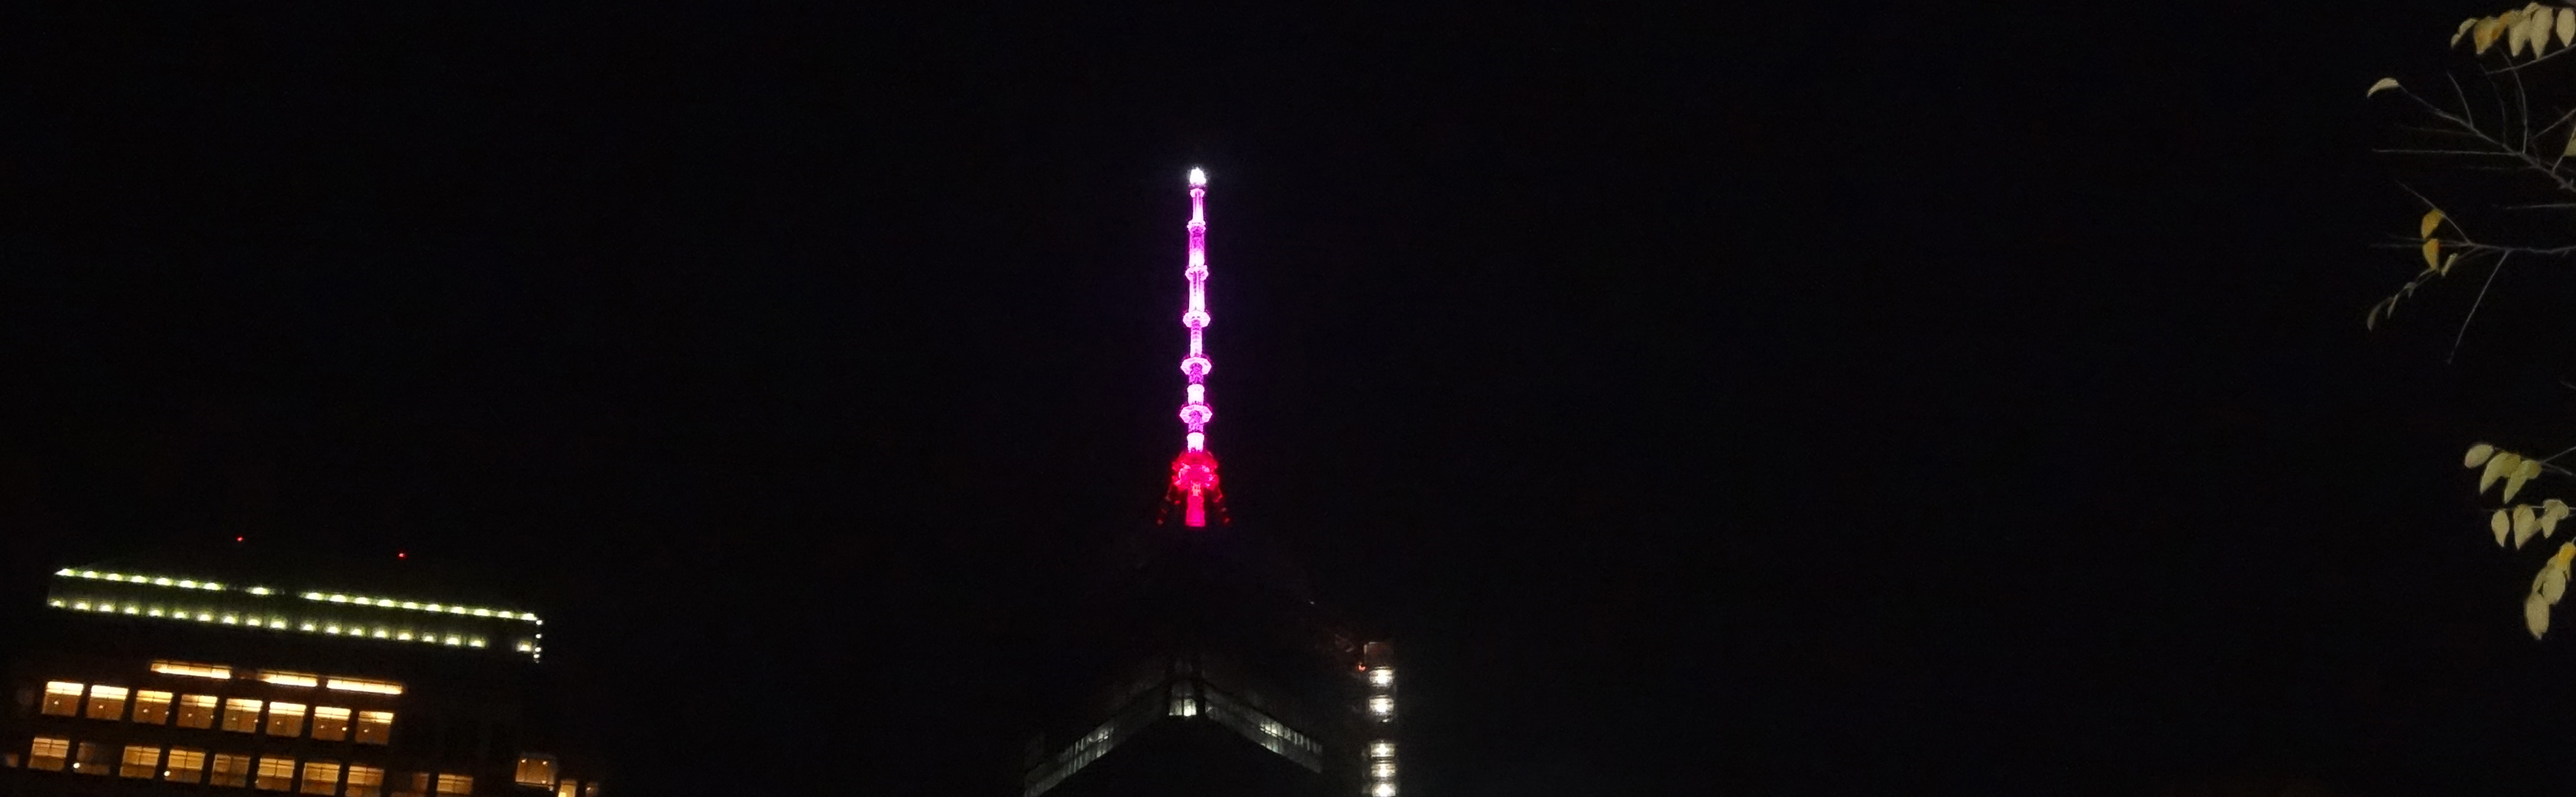 Tower lighted red